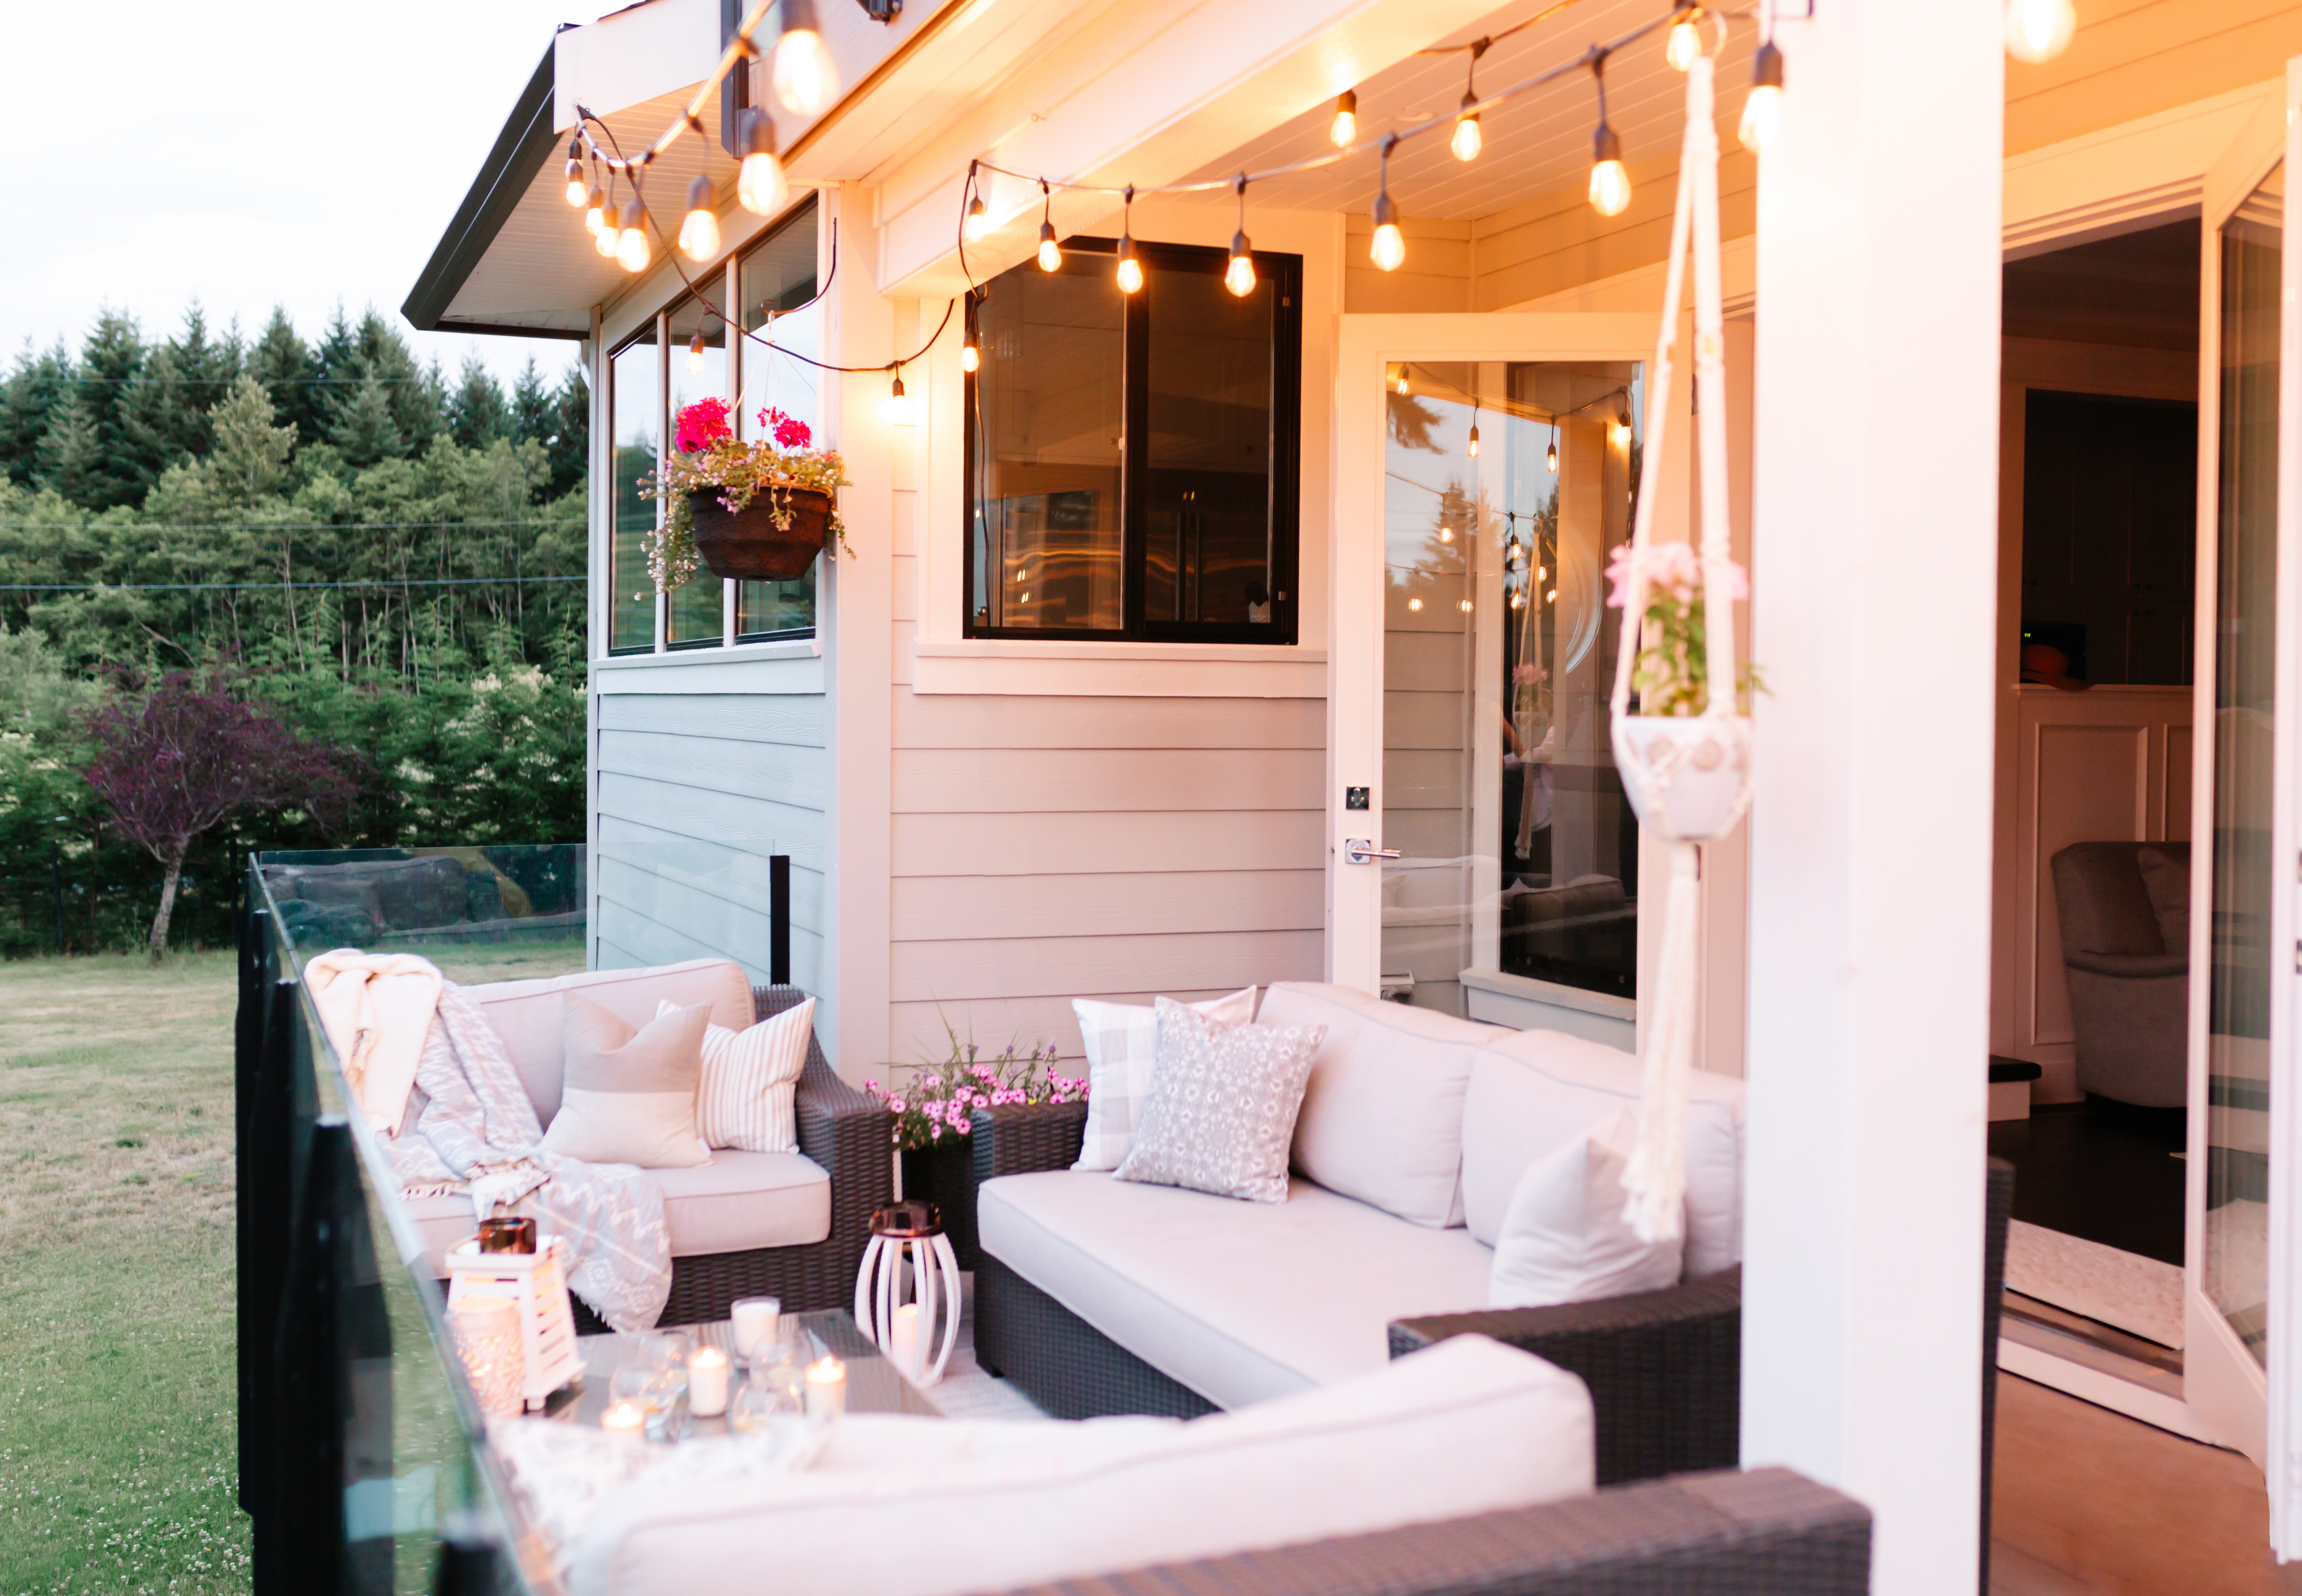 Cozy patio with string lights, cushioned seating and plants at dusk; no people visible. Used in lifestyle article